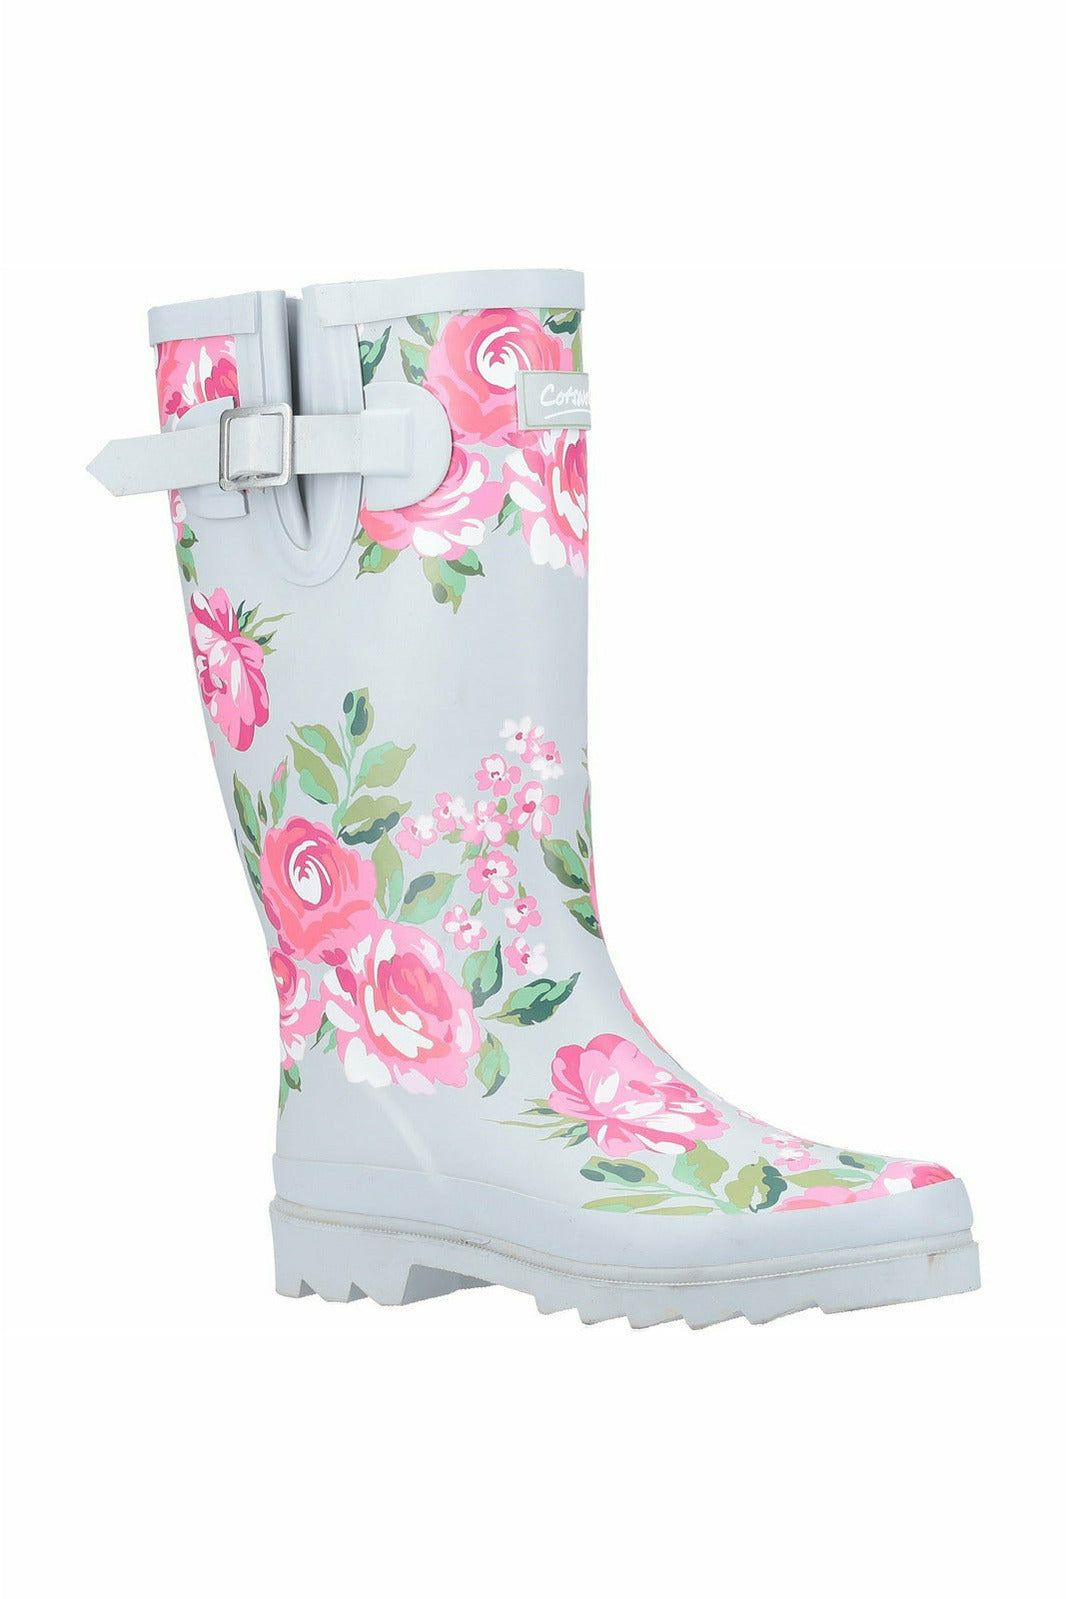 Cotswold - Blossom Ladies flower Welly